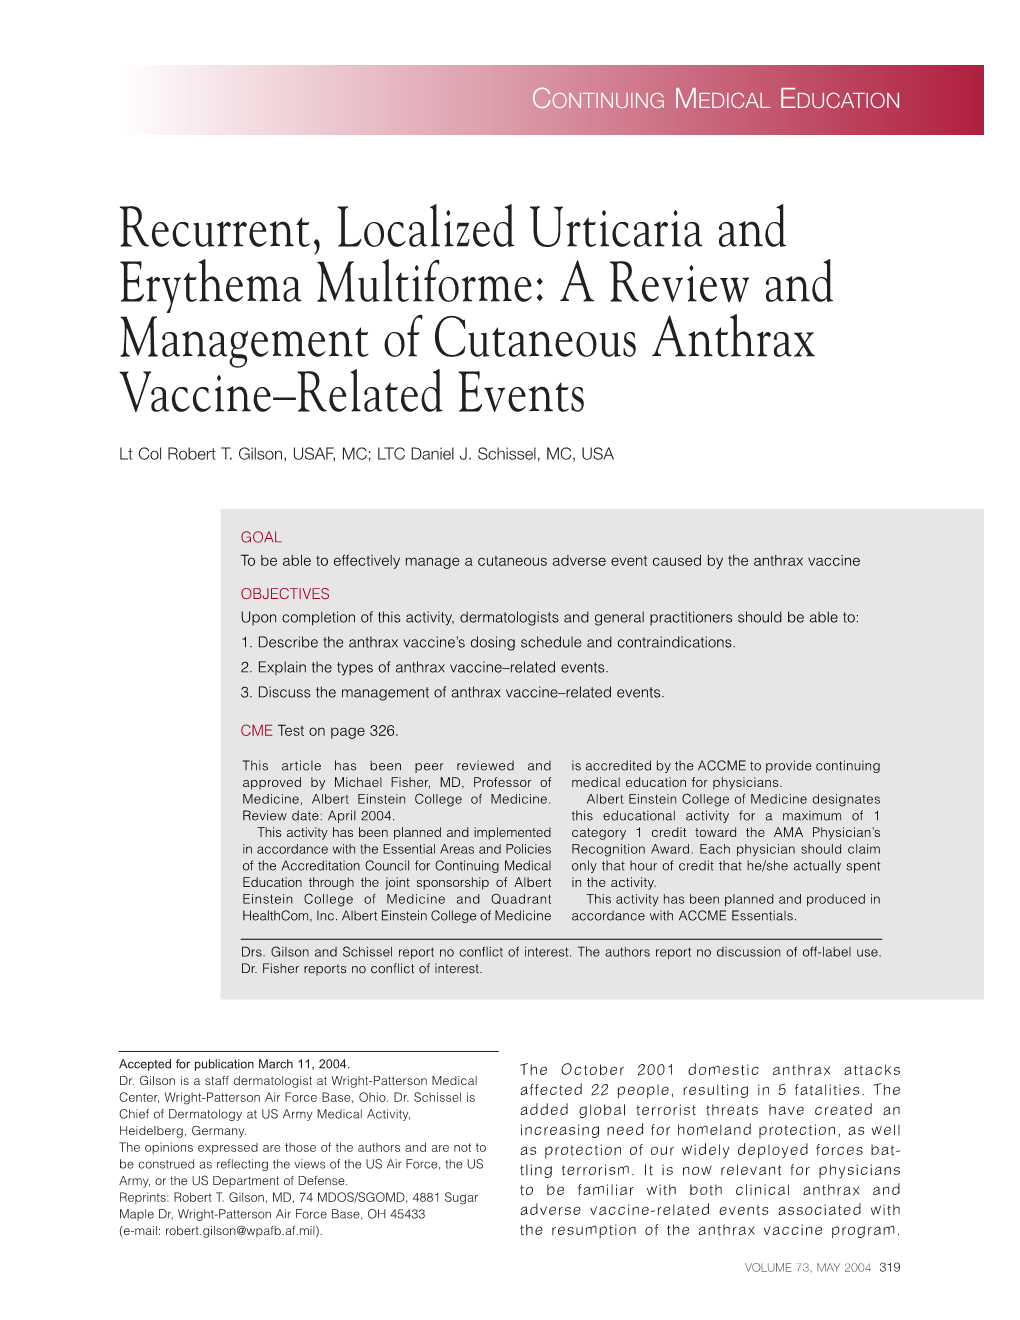 Recurrent, Localized Urticaria and Erythema Multiforme: a Review and Management of Cutaneous Anthrax Vaccine–Related Events